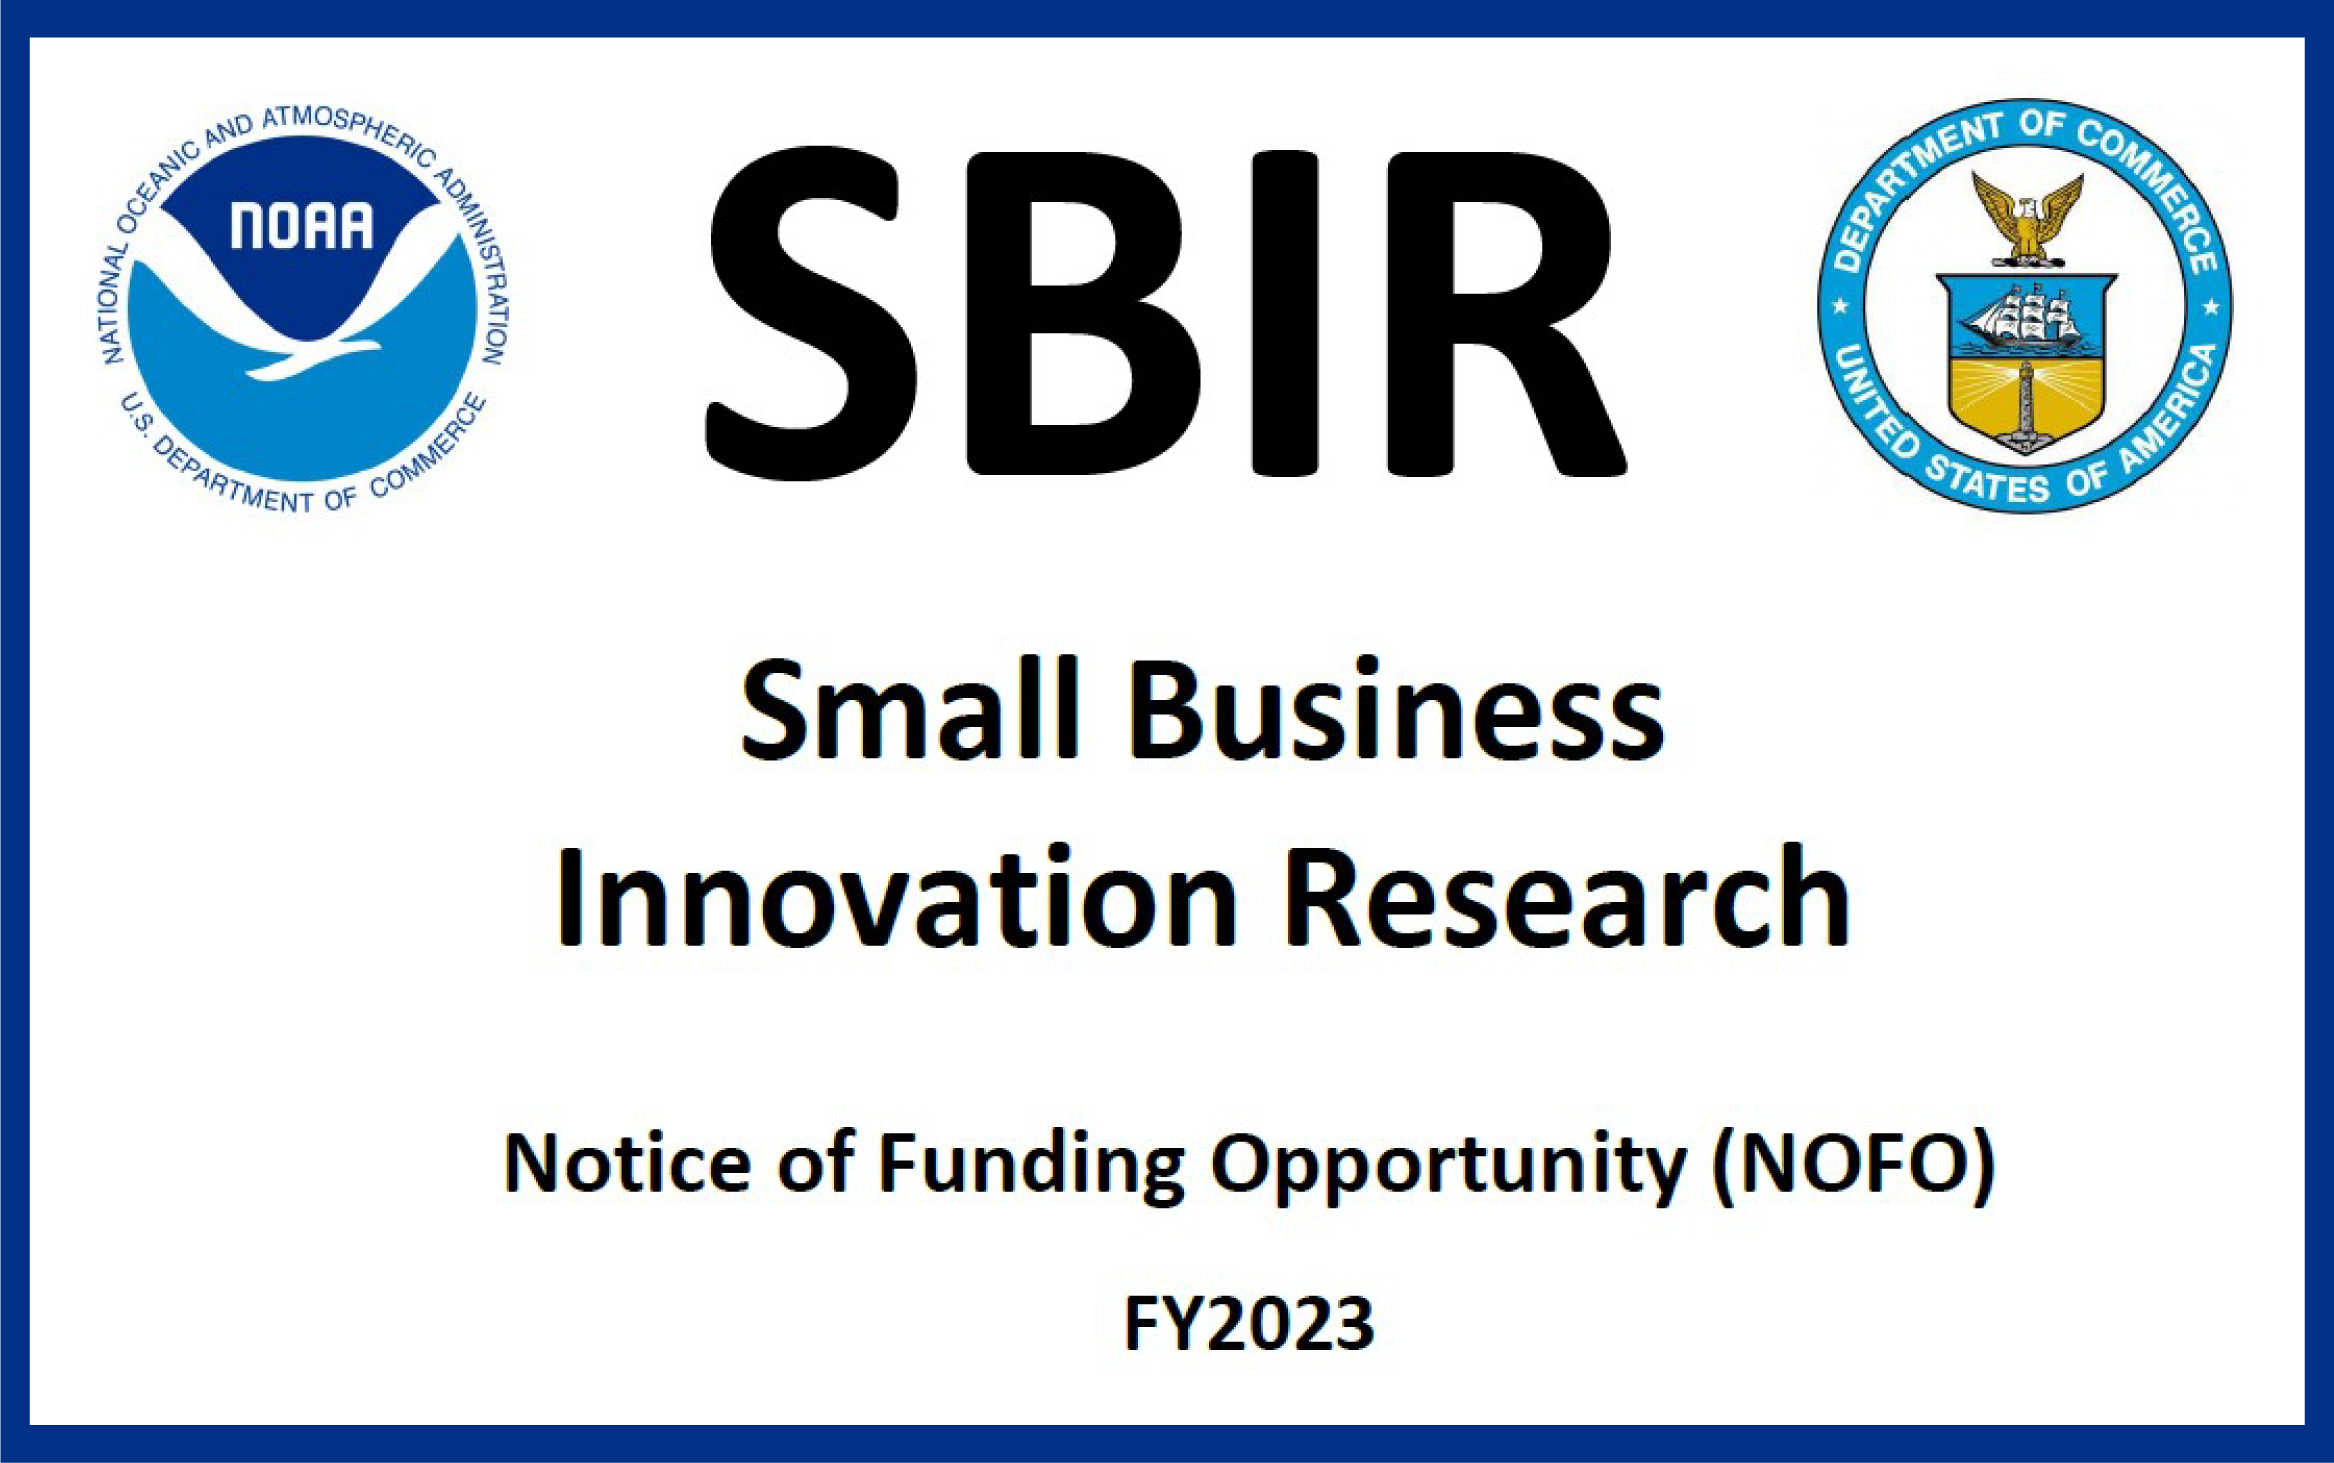 NOAA issues FY23 call for Phase I SBIR proposals